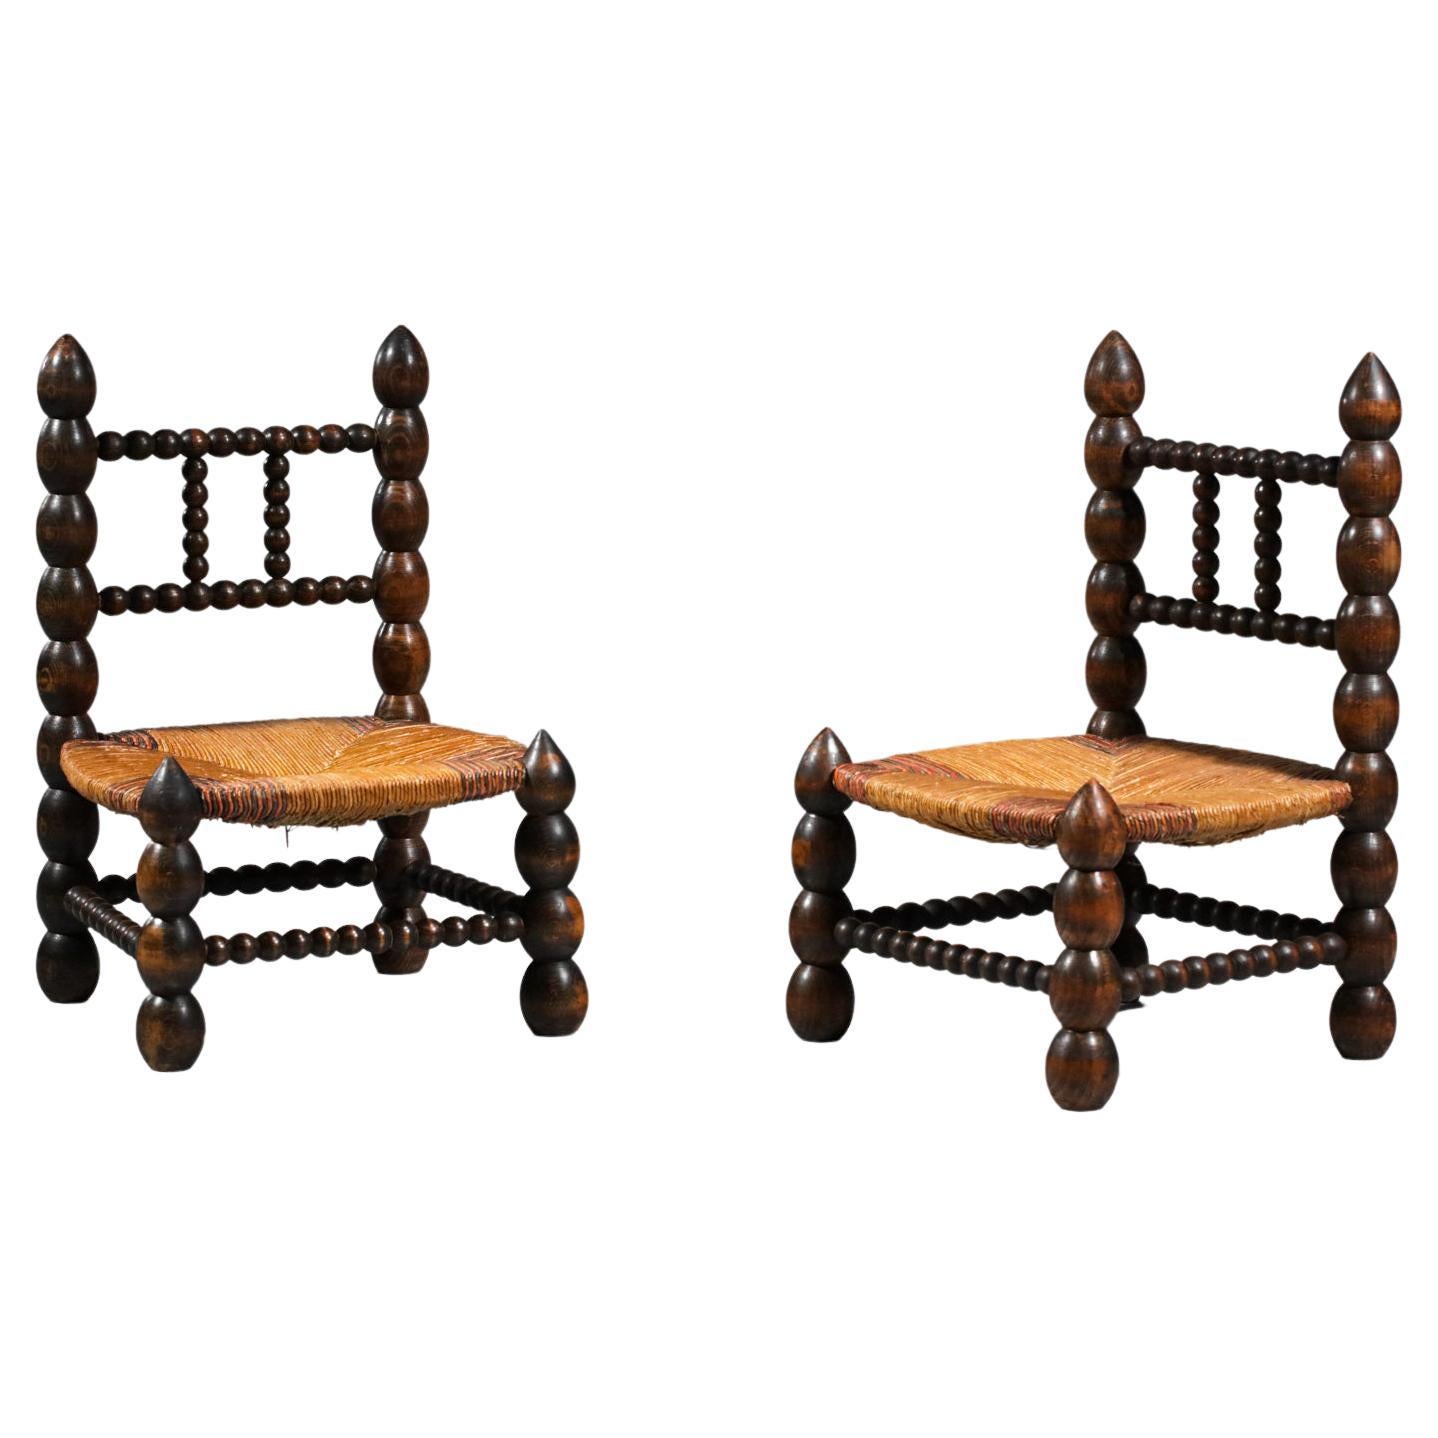 Pair of Turned Wood Fireplace Chairs from the 60s Popular French Design